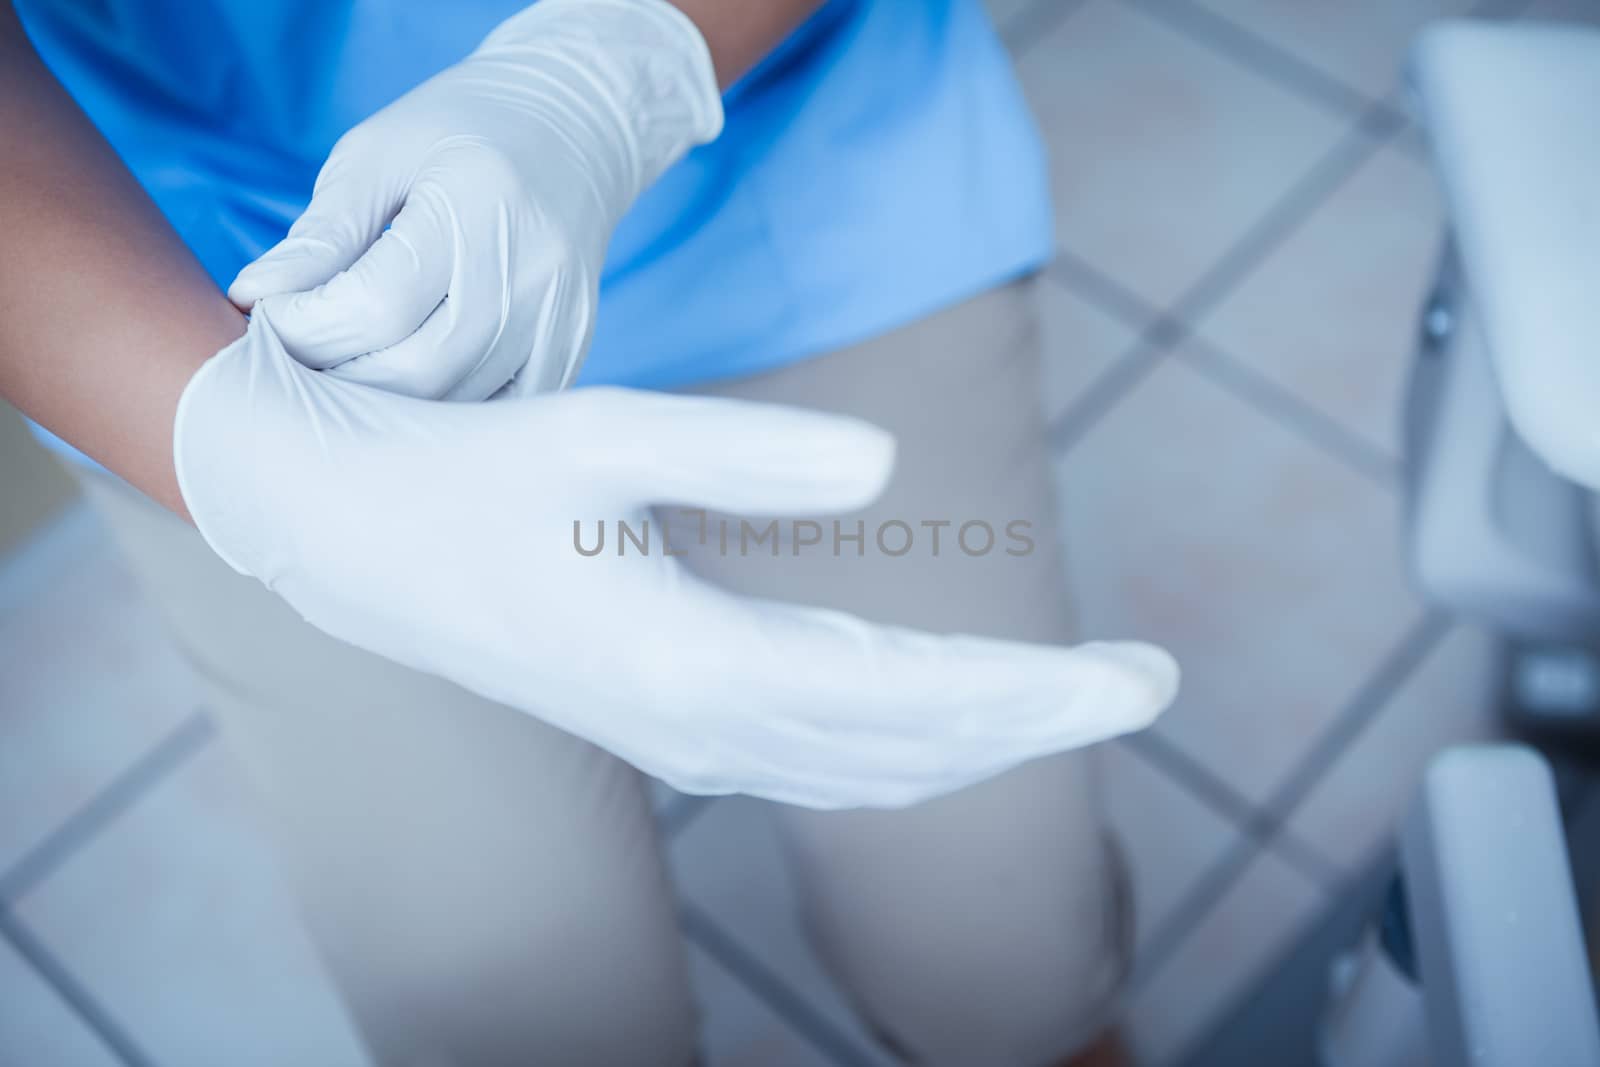 Close up mid section of female dentist wearing surgical glove